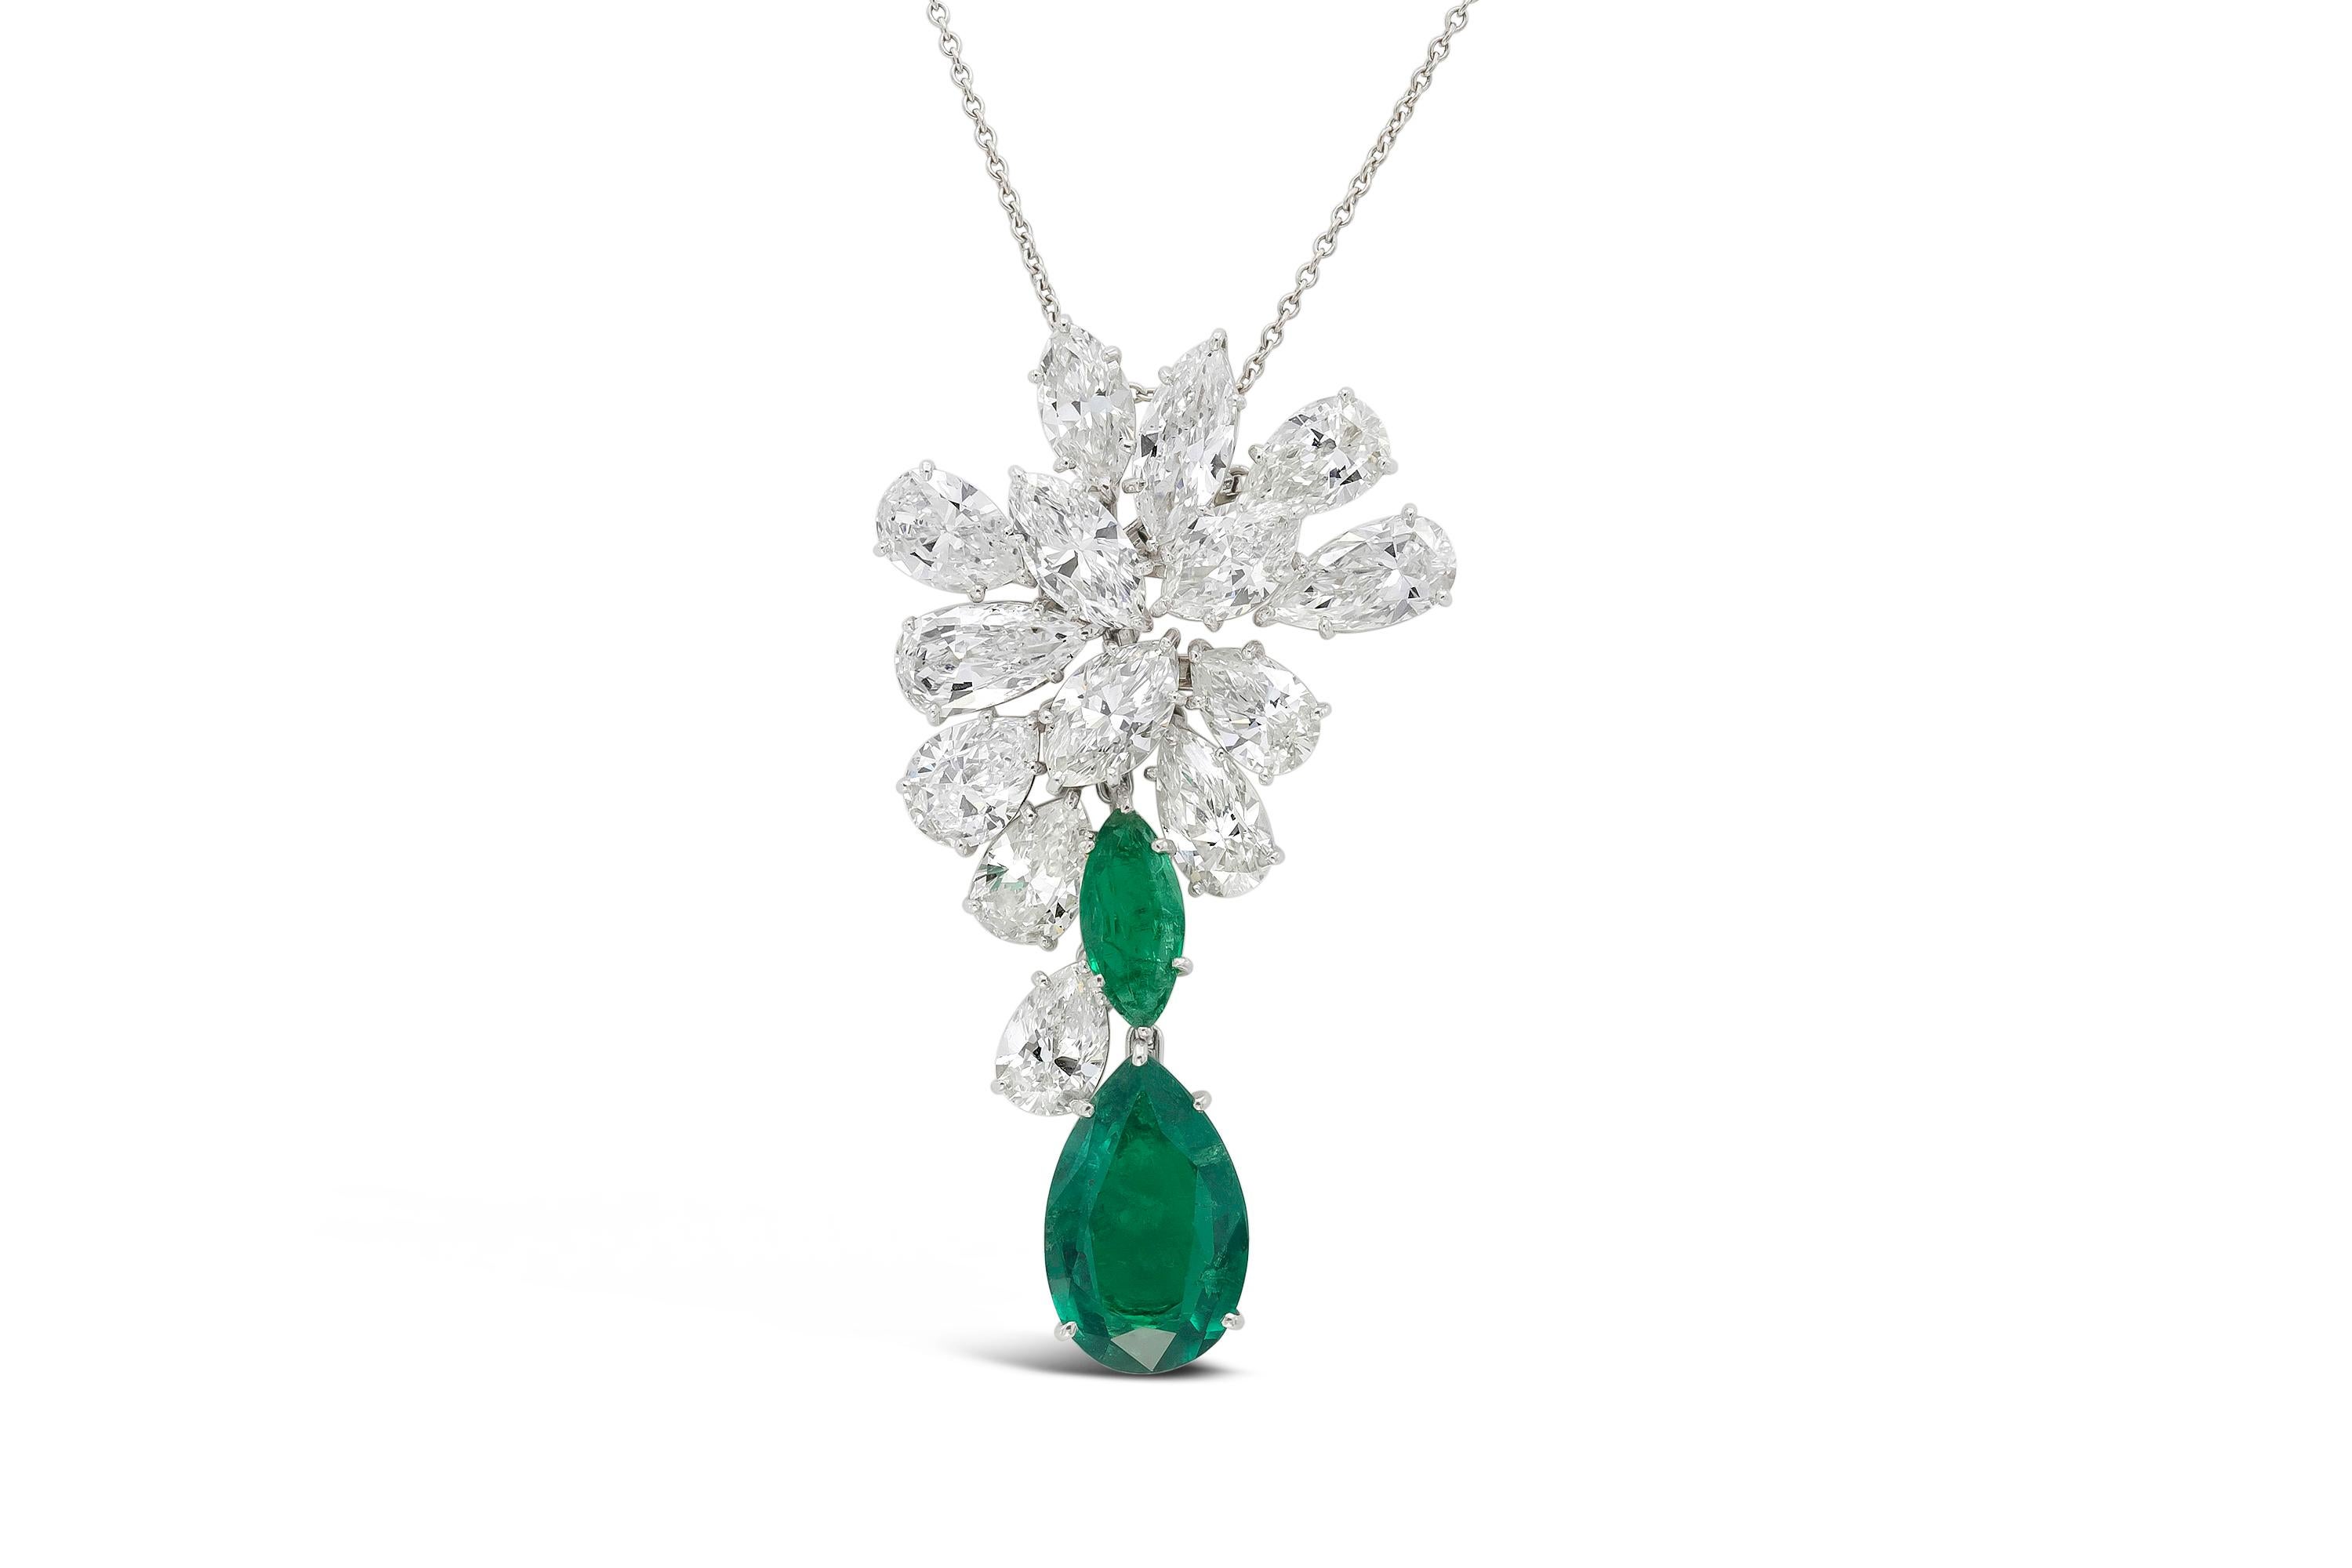 Finely crafted in platinum with Pear Shaped and Marquise cut diamonds weighing a total of 11.31 carats.
The brooch/pendant features a Pear Shaped Colombian Emerald weighing 4.04 carats, and a Marquise cut Colombian Emerald weighing 0.79 carat.
Both